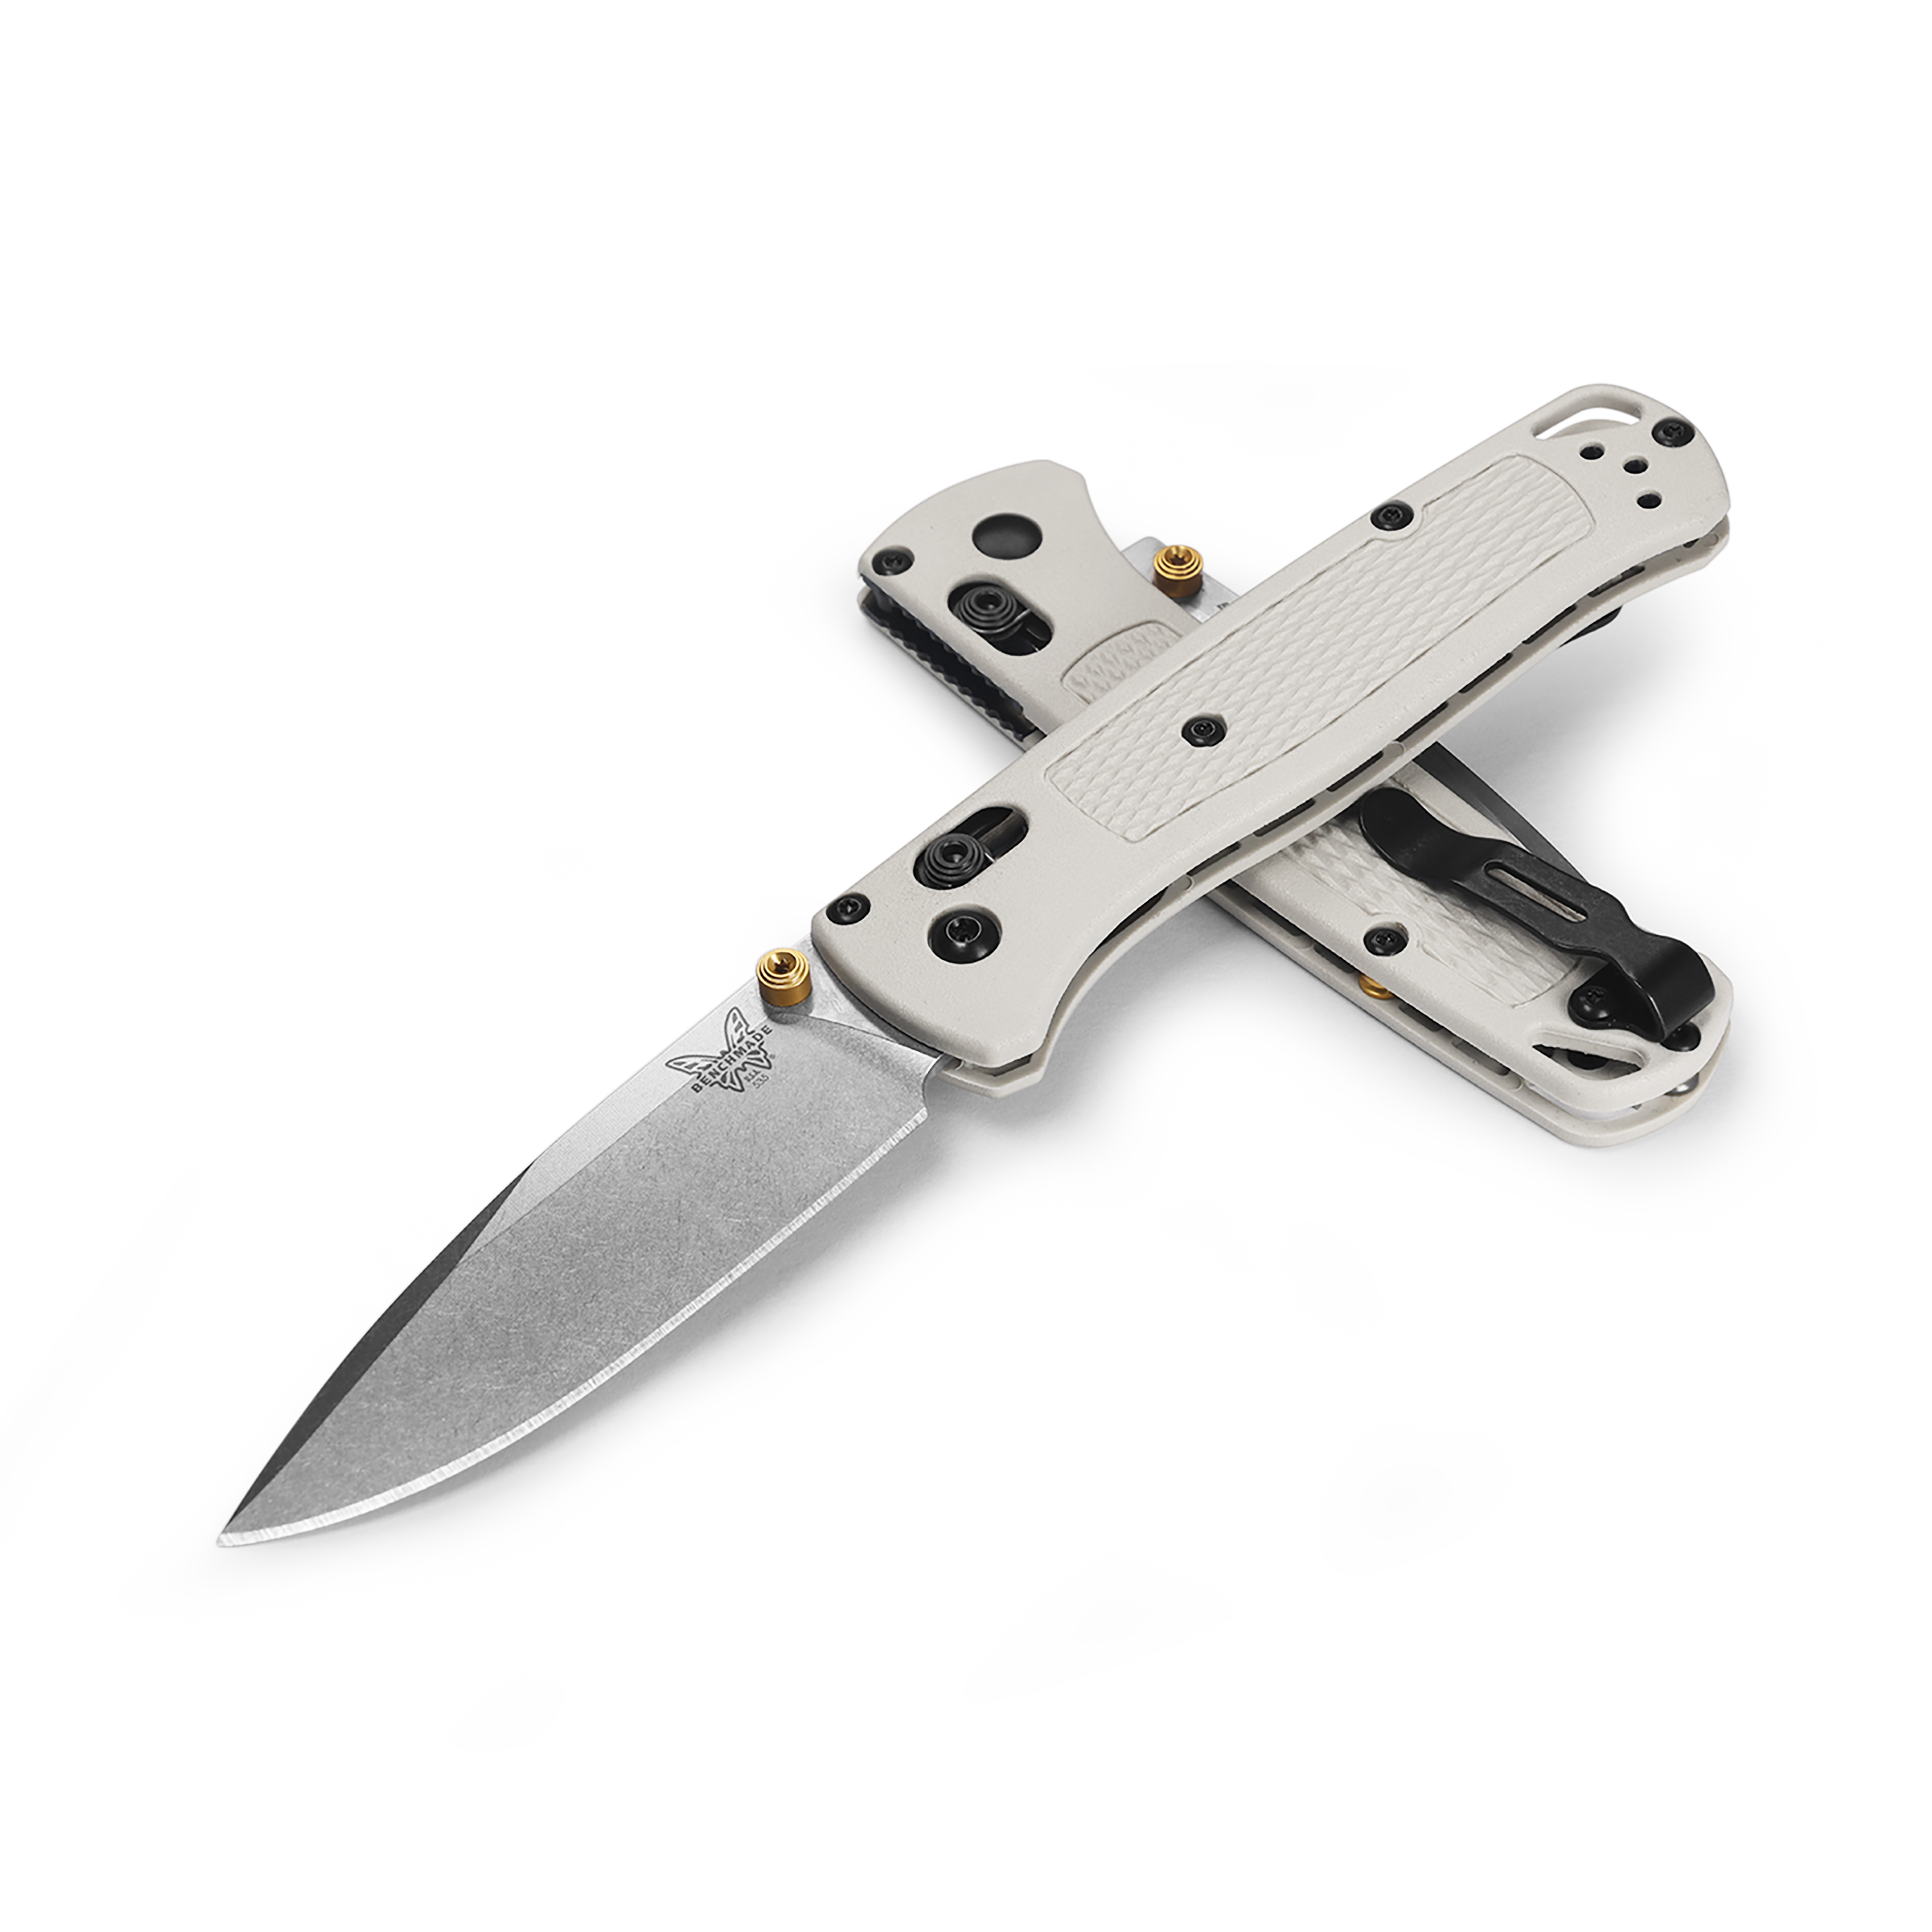 Benchmade Bugout - AXIS Lock - Tan Grivory Handle - 535-12